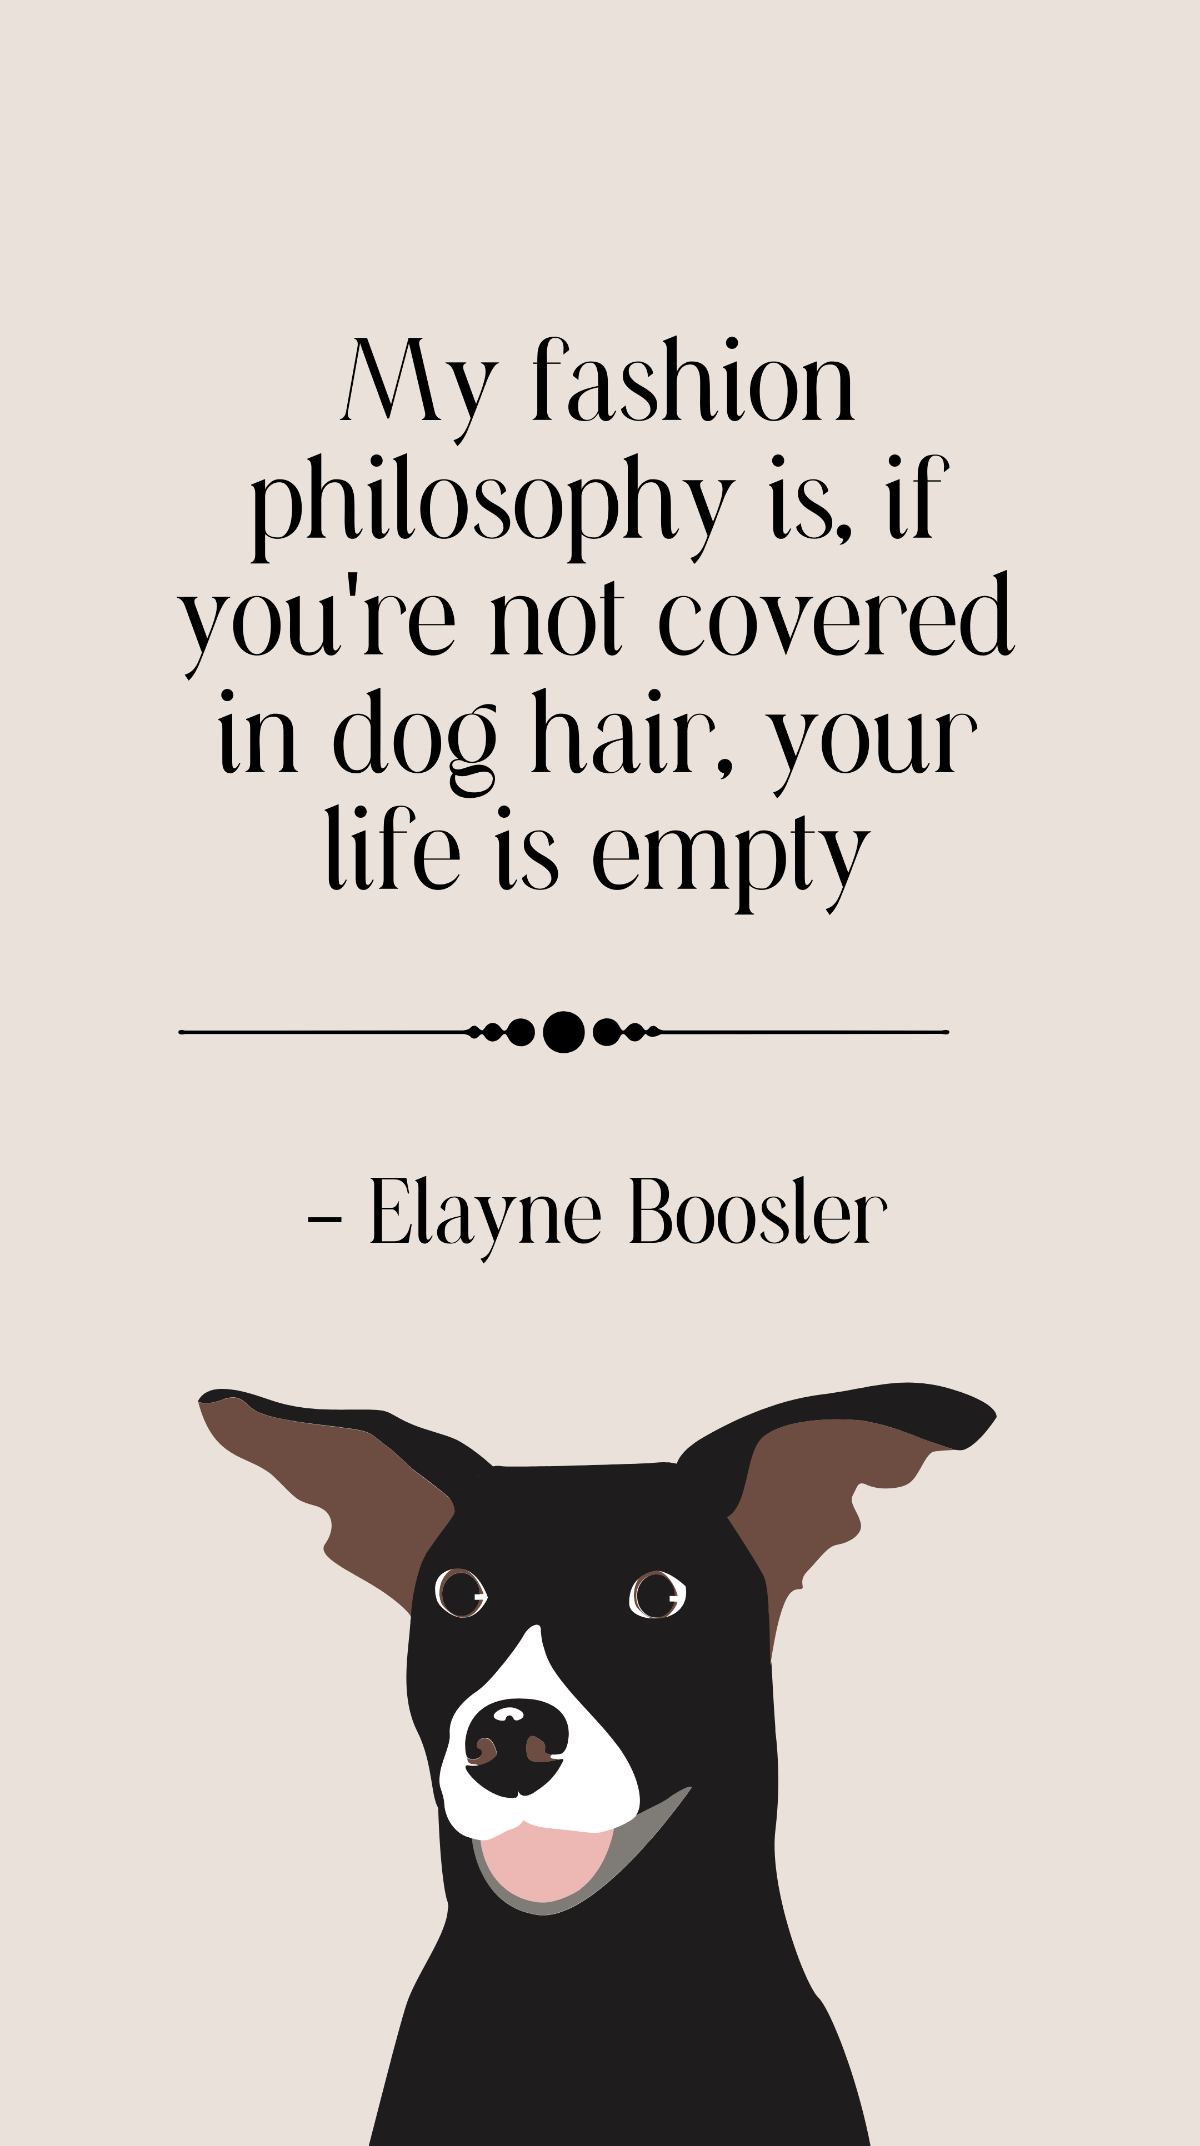 Elayne Boosler - My fashion philosophy is, if you're not covered in dog hair, your life is empty Template